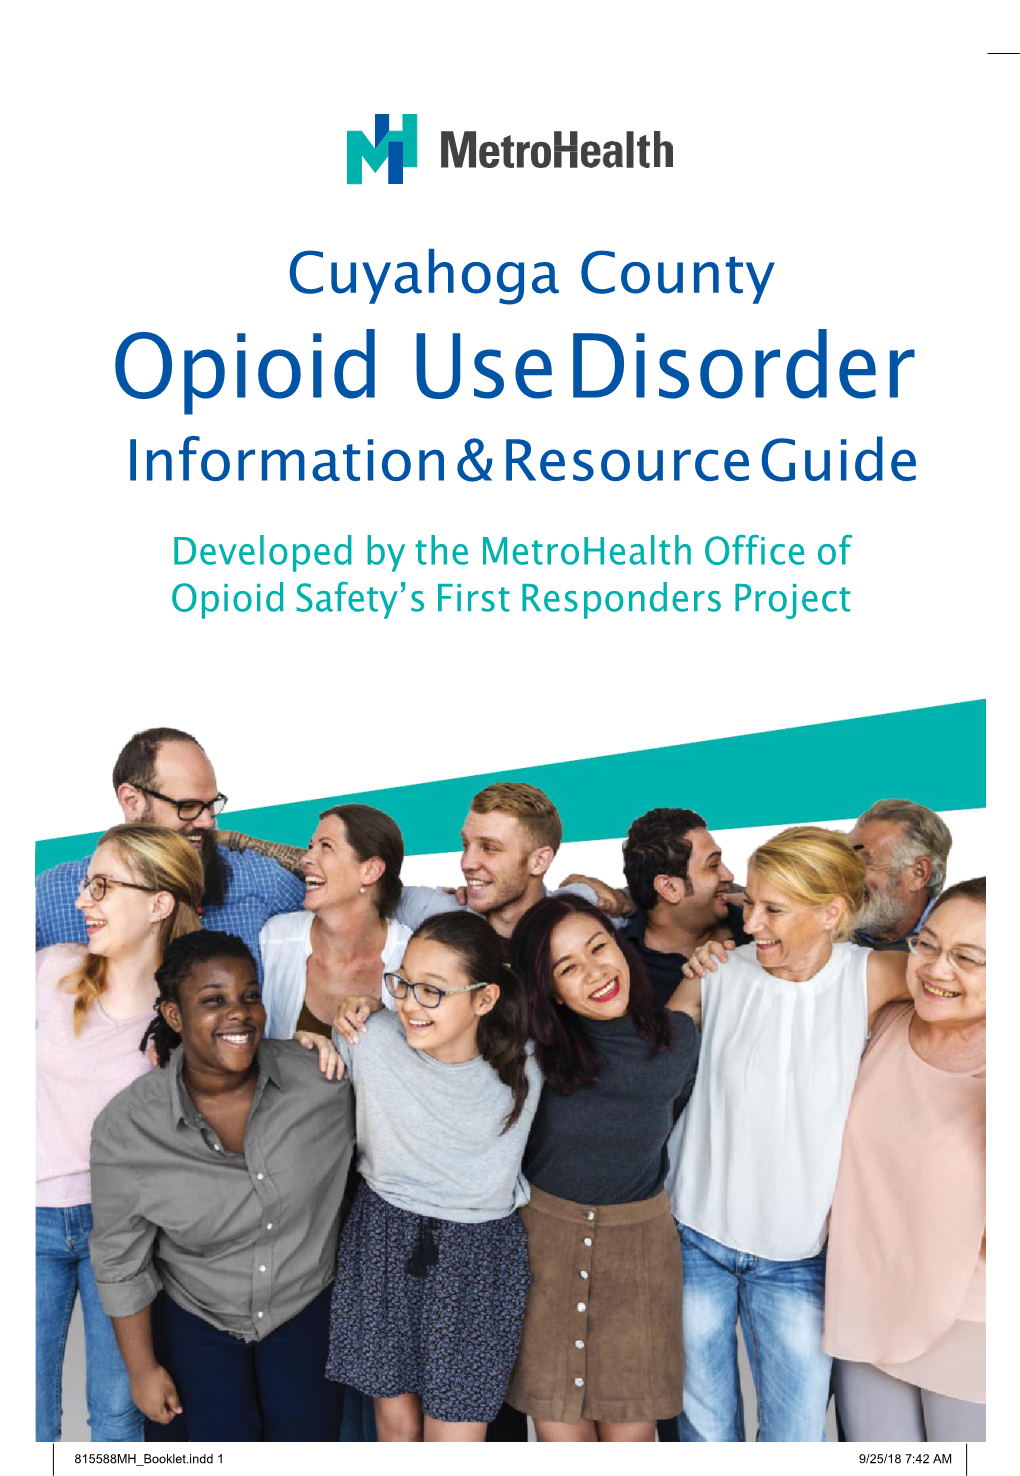 Cuyahoga County Opioid Use Disorder Information & Resource